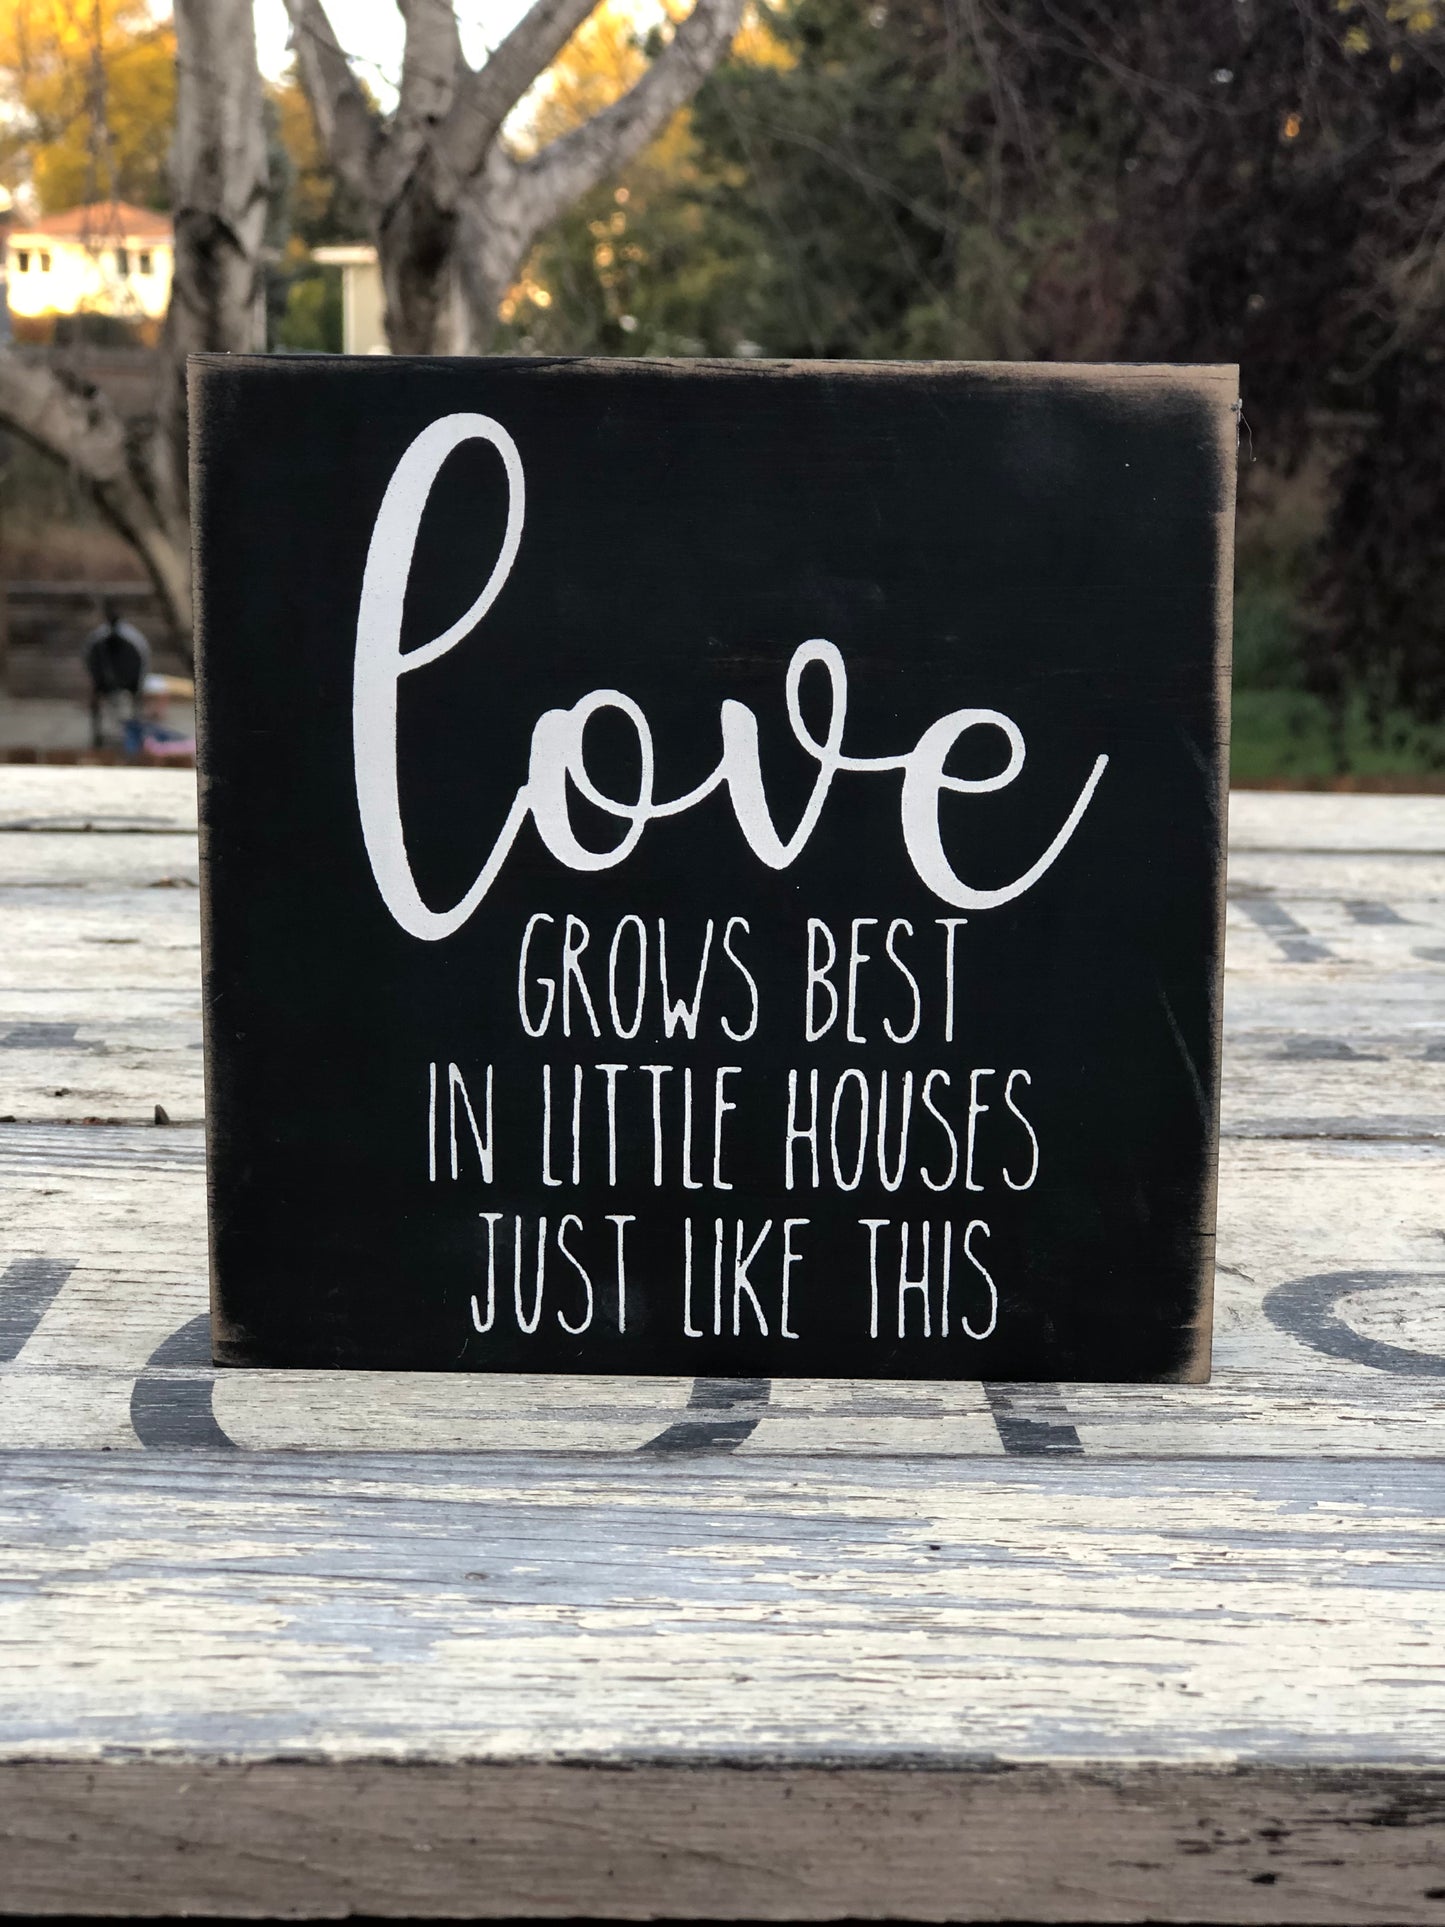 GNOME PRINT DOUBLE SIDED 5.25 IN. WITH CHRISTMAS GNOME BUCKET LIST/ AND THANK YOU FOR A HOUSE FULL OF PEOPLE I LOVE AMEN OR LOVE GROWS BEST IN LITTLE HOUSES JUST LIKE THIS - WOOD SIGN DECOR